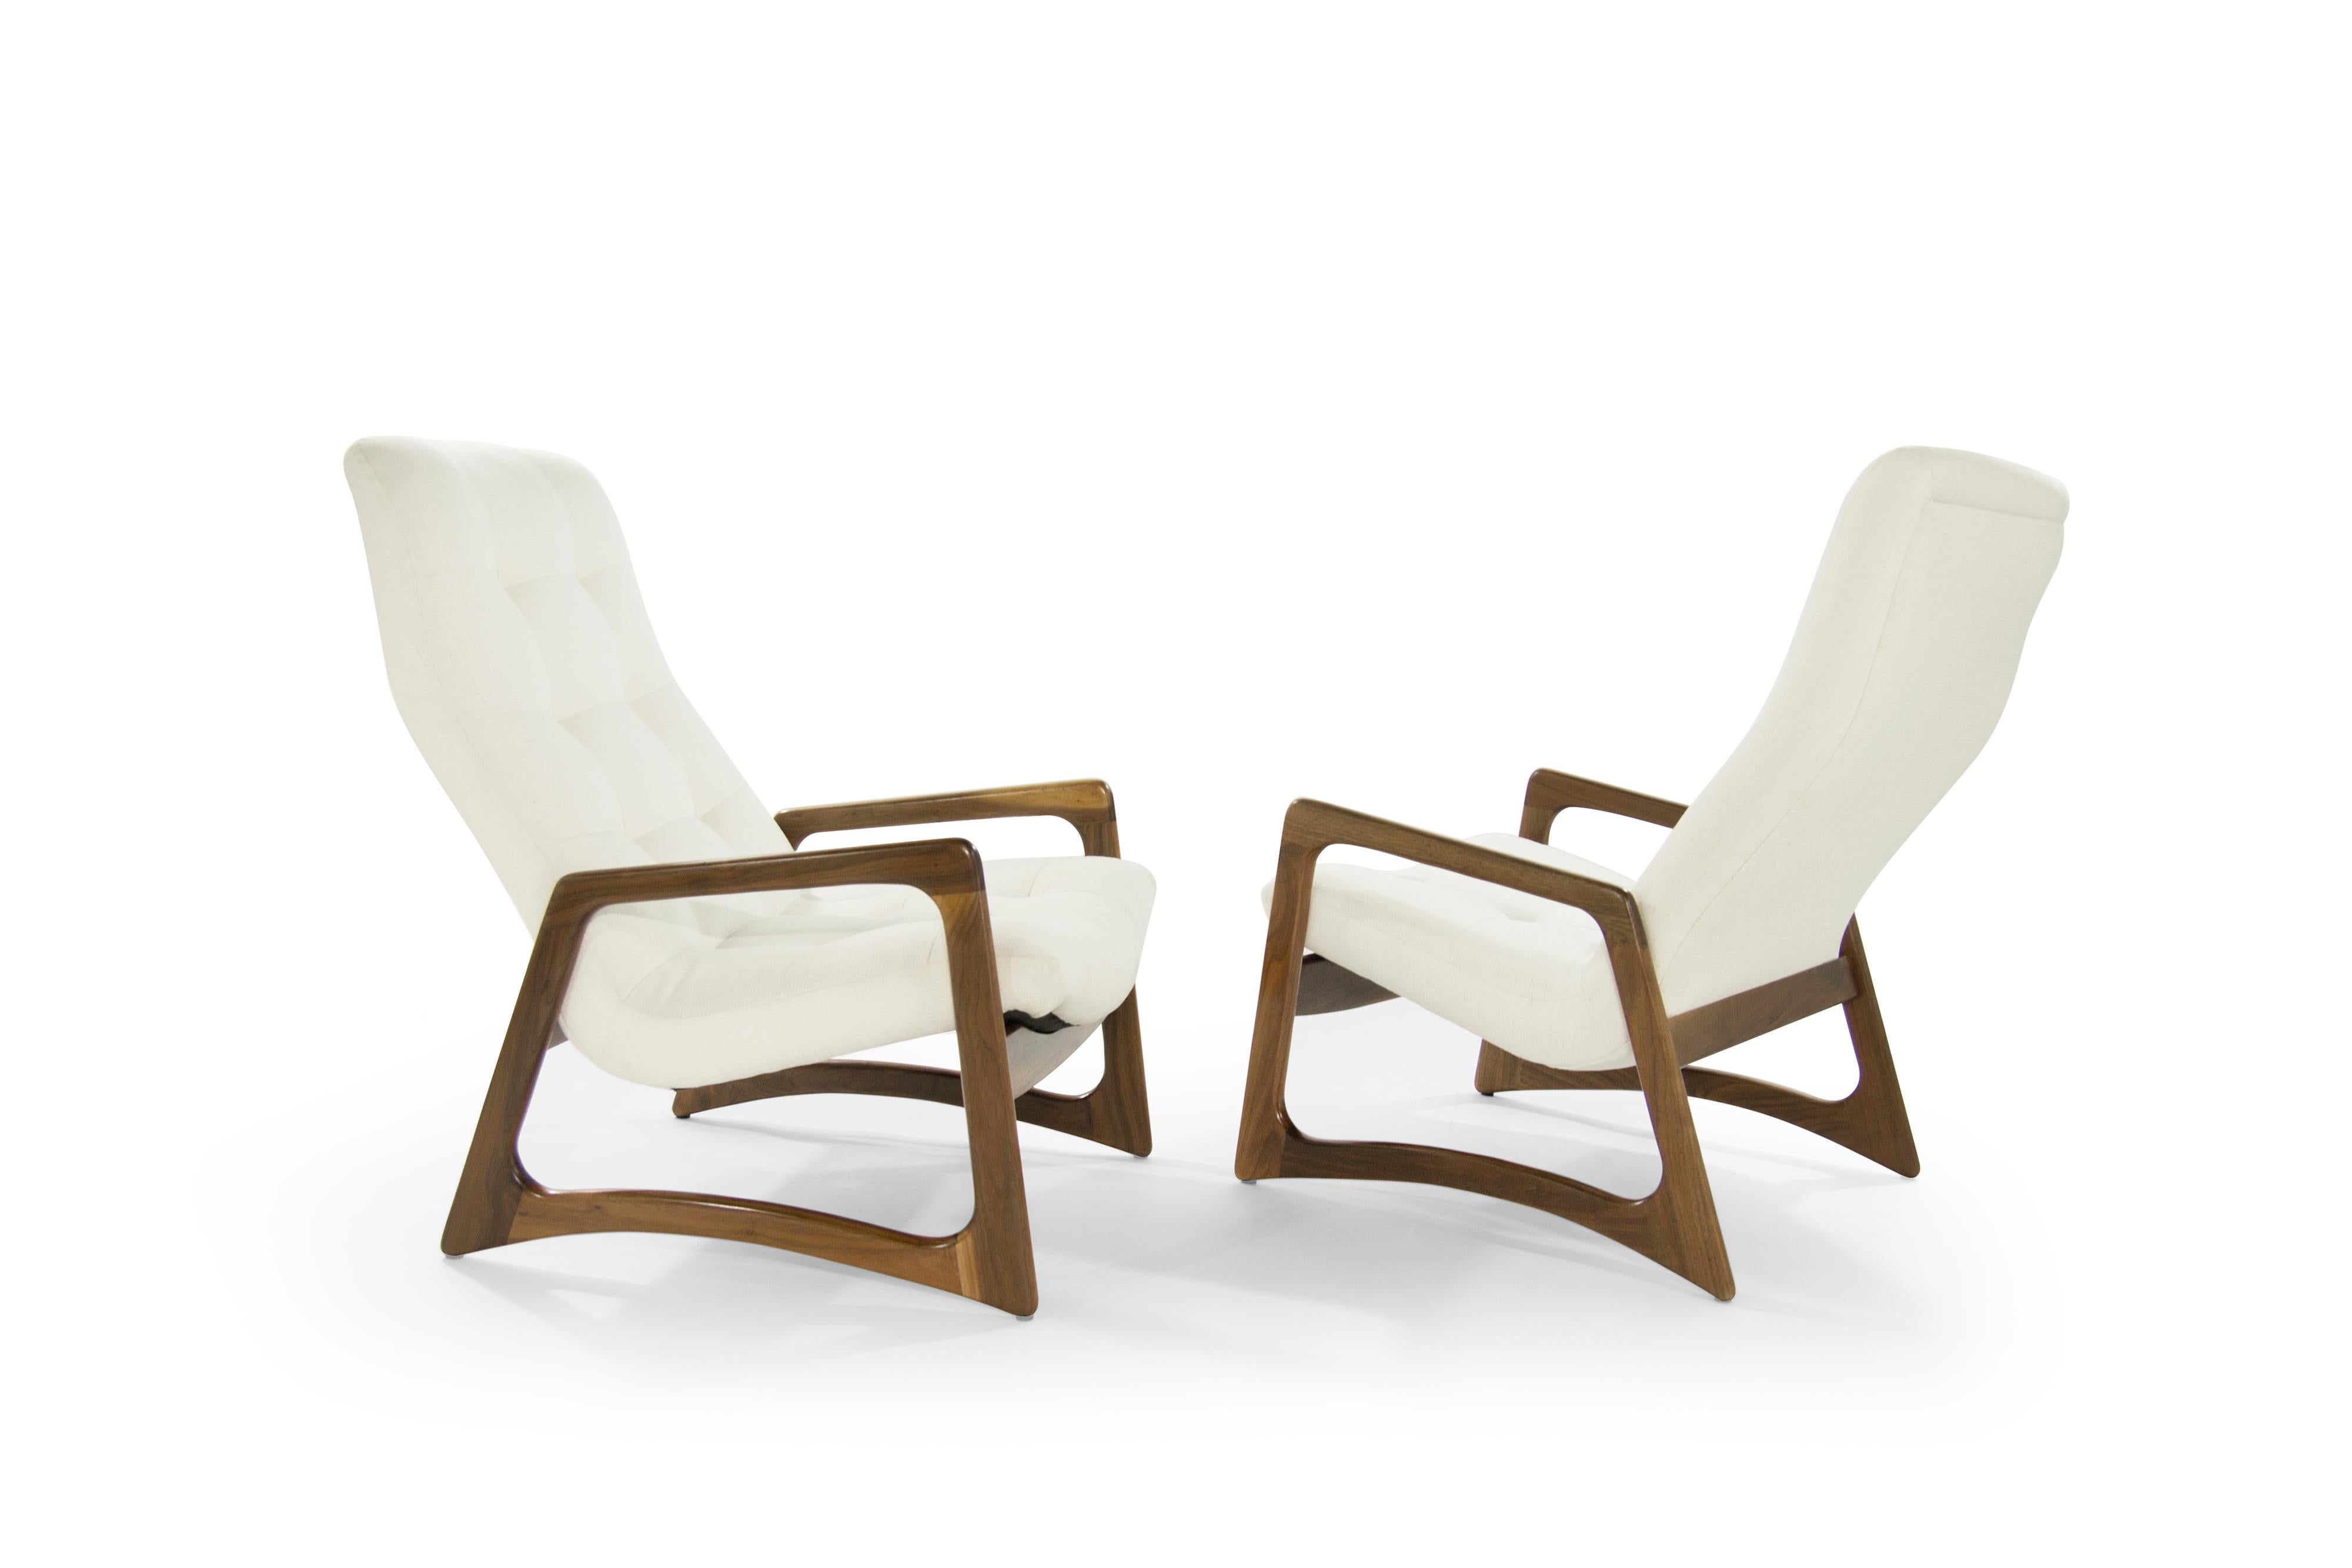 American Sculptural Walnut Lounge Chairs by Adrian Pearsall for Craft Associates